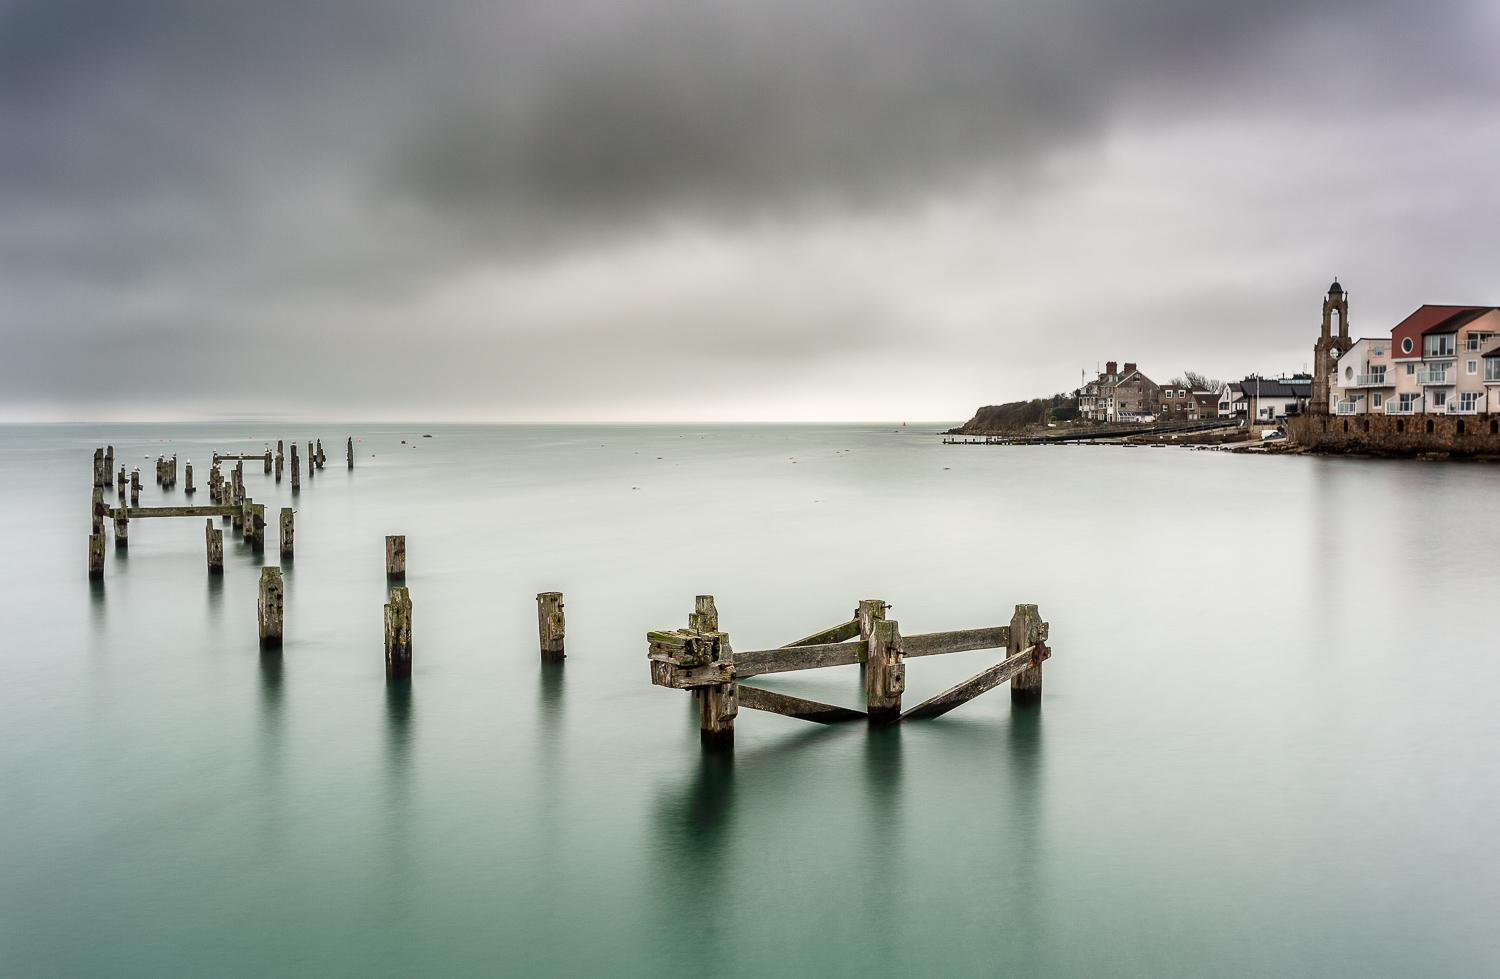 The Old Pier, Swanage 2019.03.21